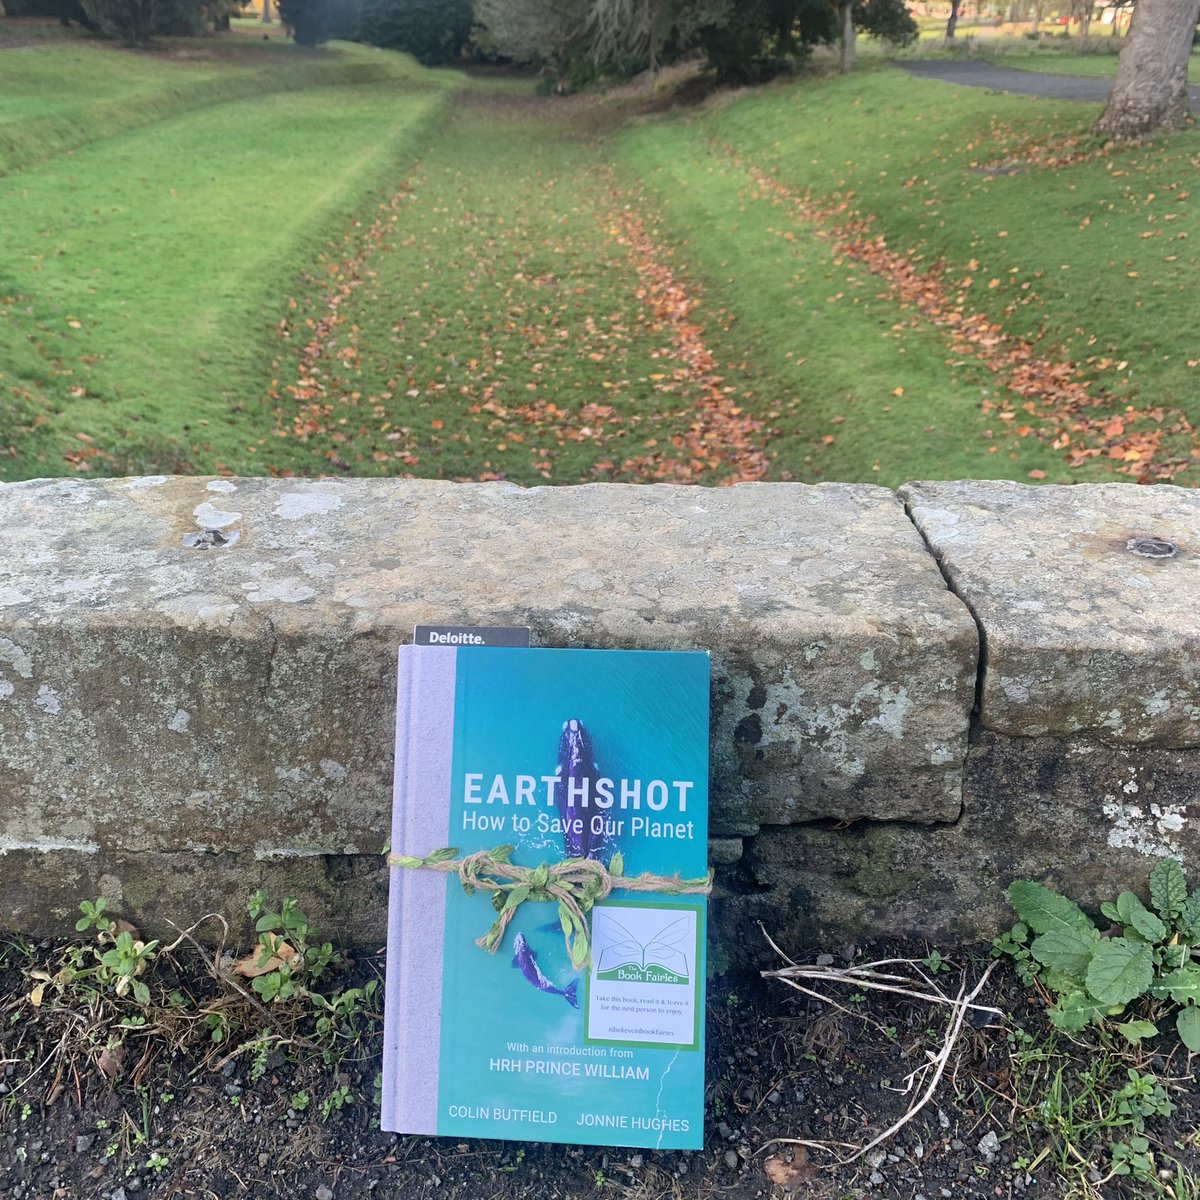 #DeloitteBookFairies are sharing books from a #LightBulbList of recommended reads! We left #EarthShot at Callendar Park today! #IBelieveInBookFairies #COPBookFairies #DukeofCambridge #EarthShotPrize #GreenBookFairies  #Cop26  #Deloitte #PrinceWilliam #DavidAttenborough